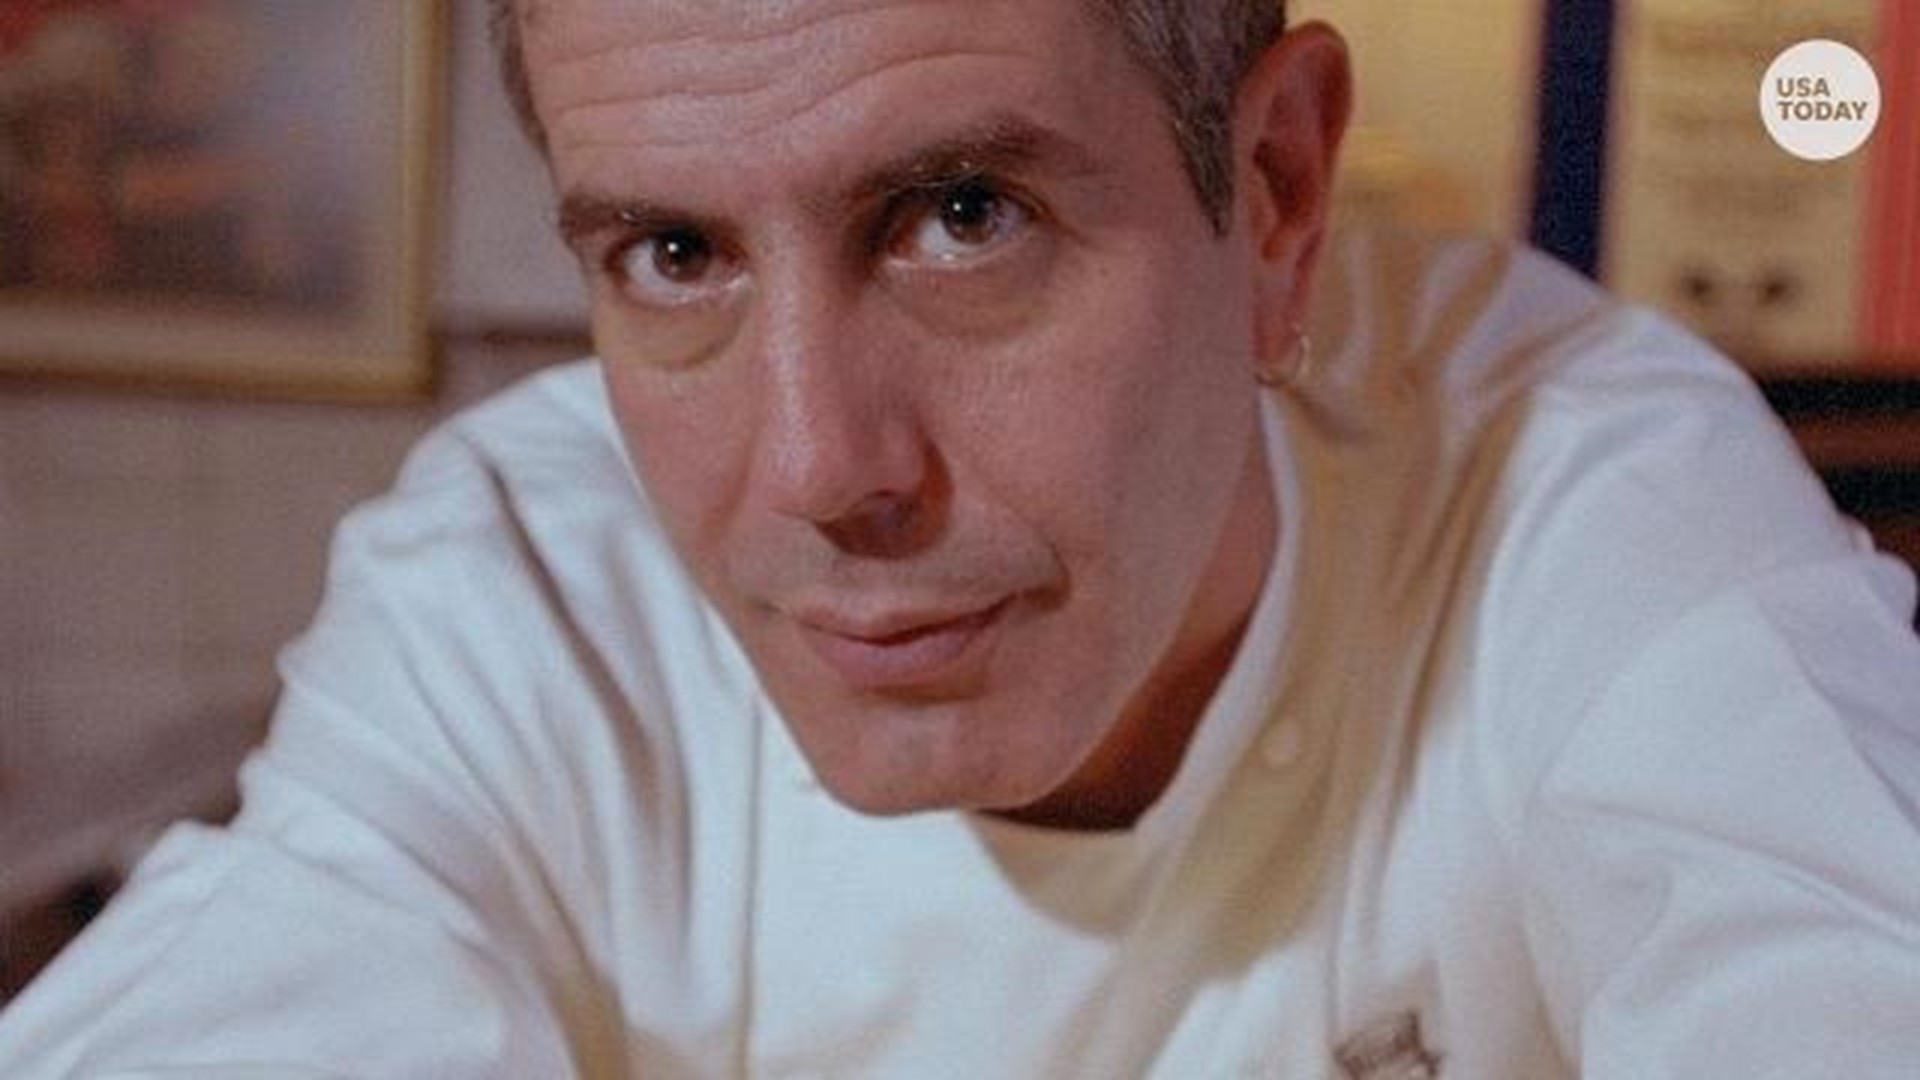 Anthony Bourdain's passion for food and travel inspired us to taste and see the world. The iconic chef, author and TV host was found dead in Strasbourg, France, where he'd been filming segments for his CNN show 'Parts Unknown.'